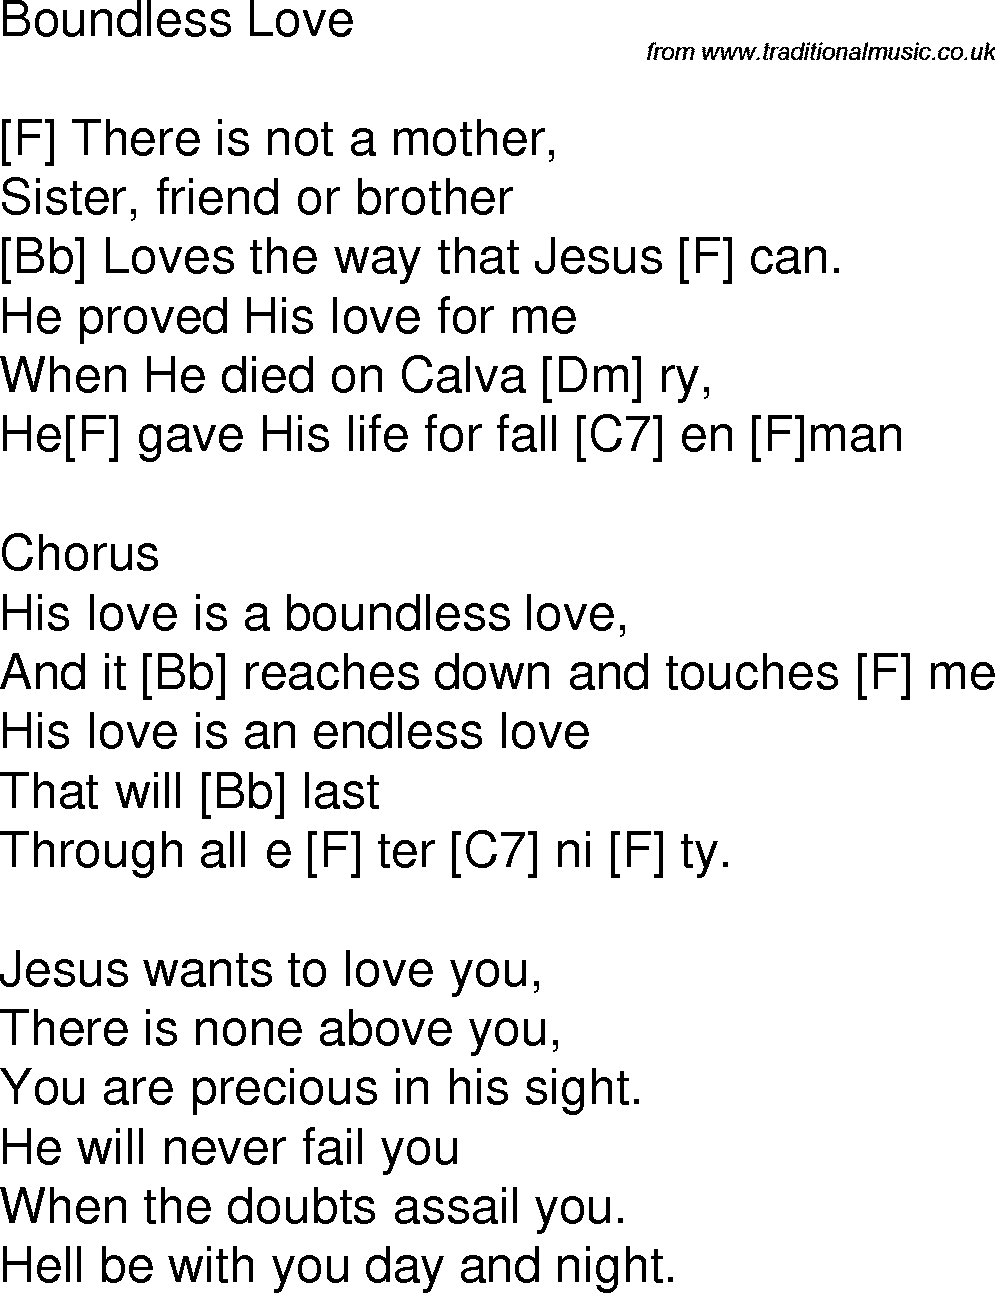 Old time song lyrics with chords for Boundless Love F